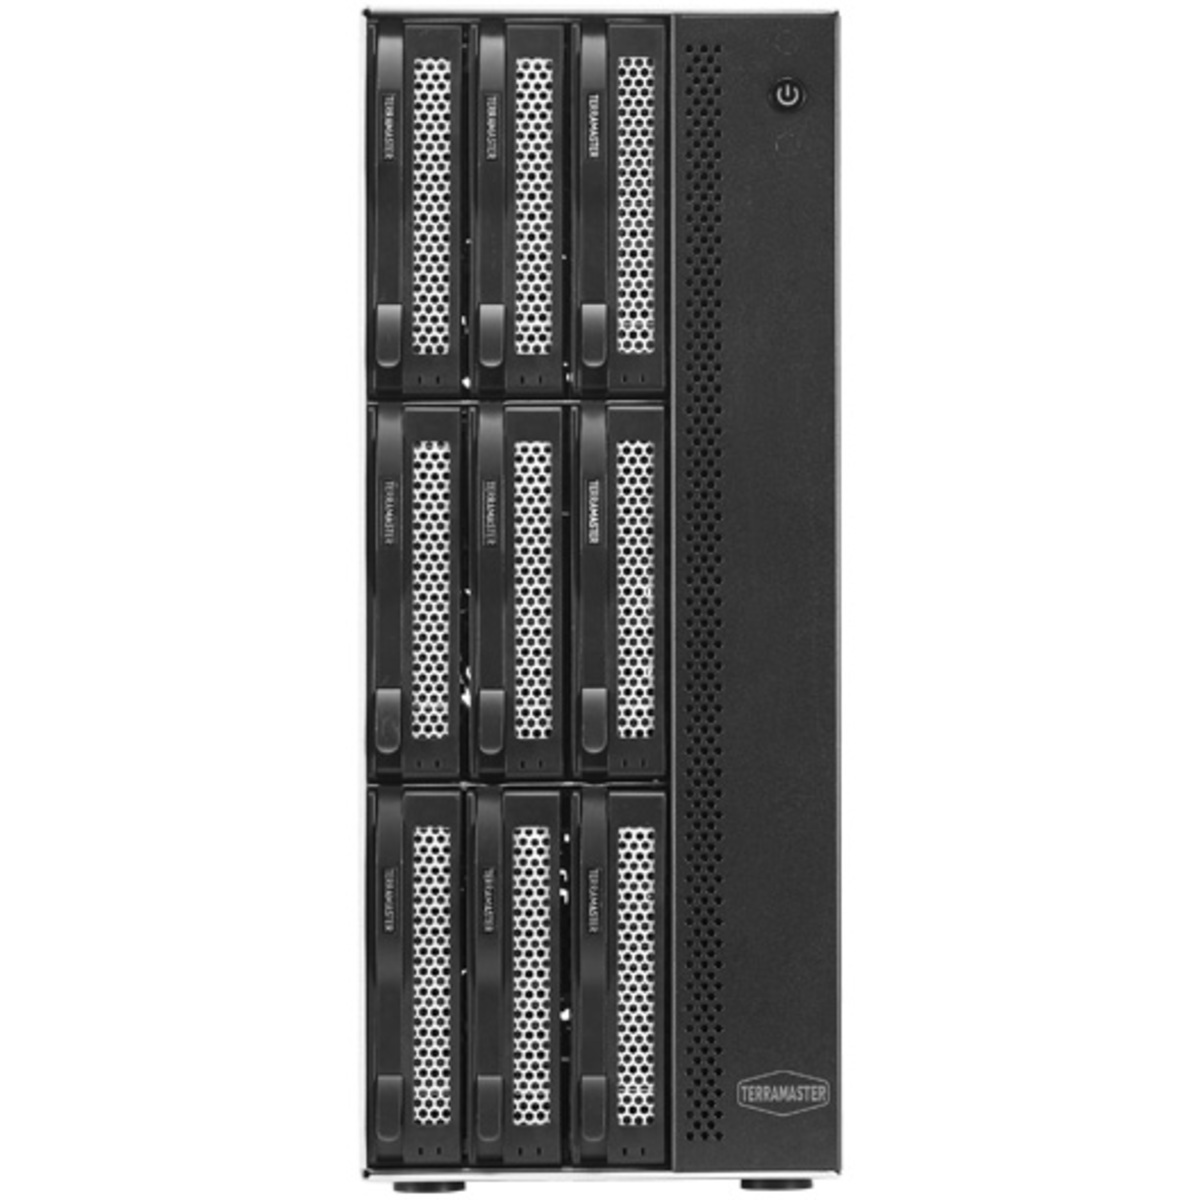 TerraMaster T9-450 56tb 9-Bay Desktop Multimedia / Power User / Business NAS - Network Attached Storage Device 7x8tb Seagate IronWolf Pro ST8000NT001 3.5 7200rpm SATA 6Gb/s HDD NAS Class Drives Installed - Burn-In Tested - ON SALE T9-450